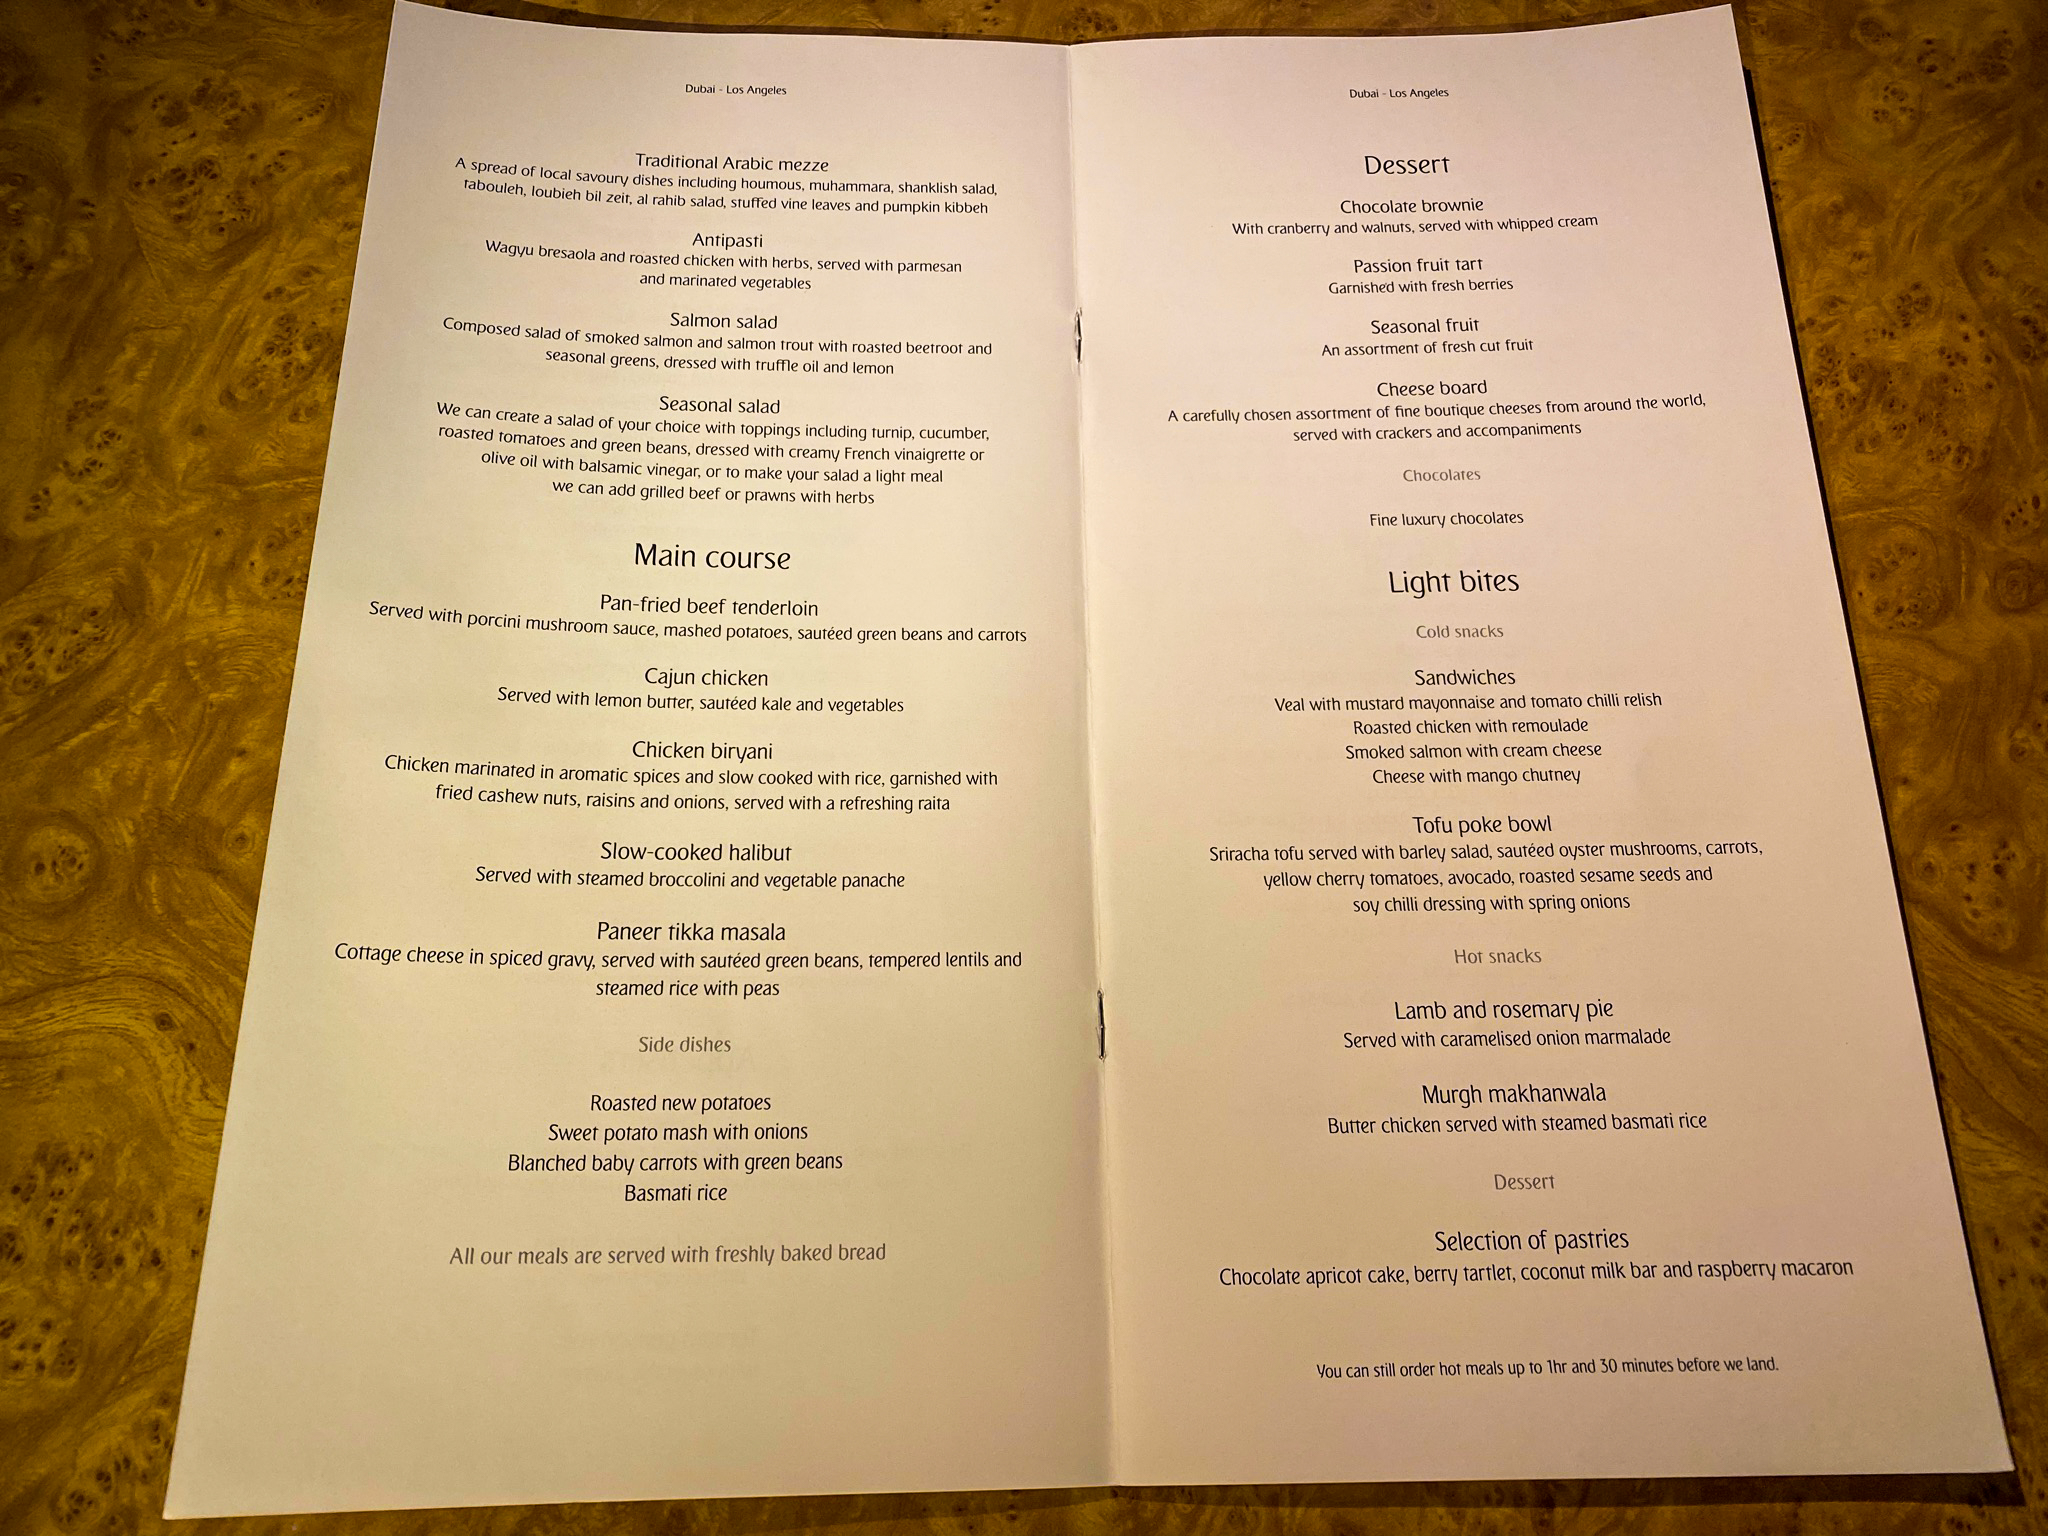 Emirates 777 First Class Food And Beverage Menu